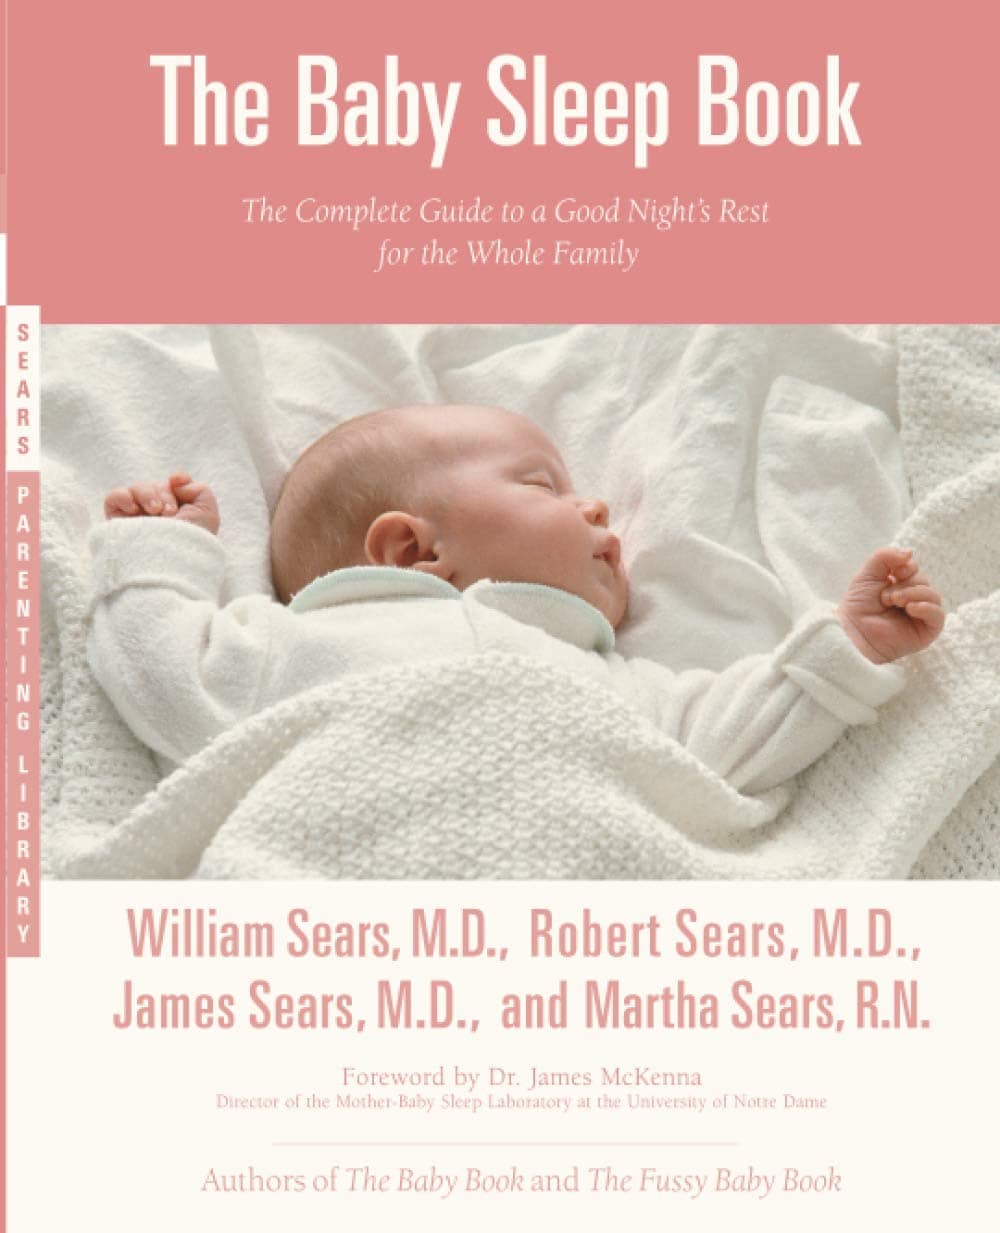 "The Baby Sleep Book" by William Sears, M.D., Robert Sears, M.D., James Sears, M.D., Martha Sears, R.N.